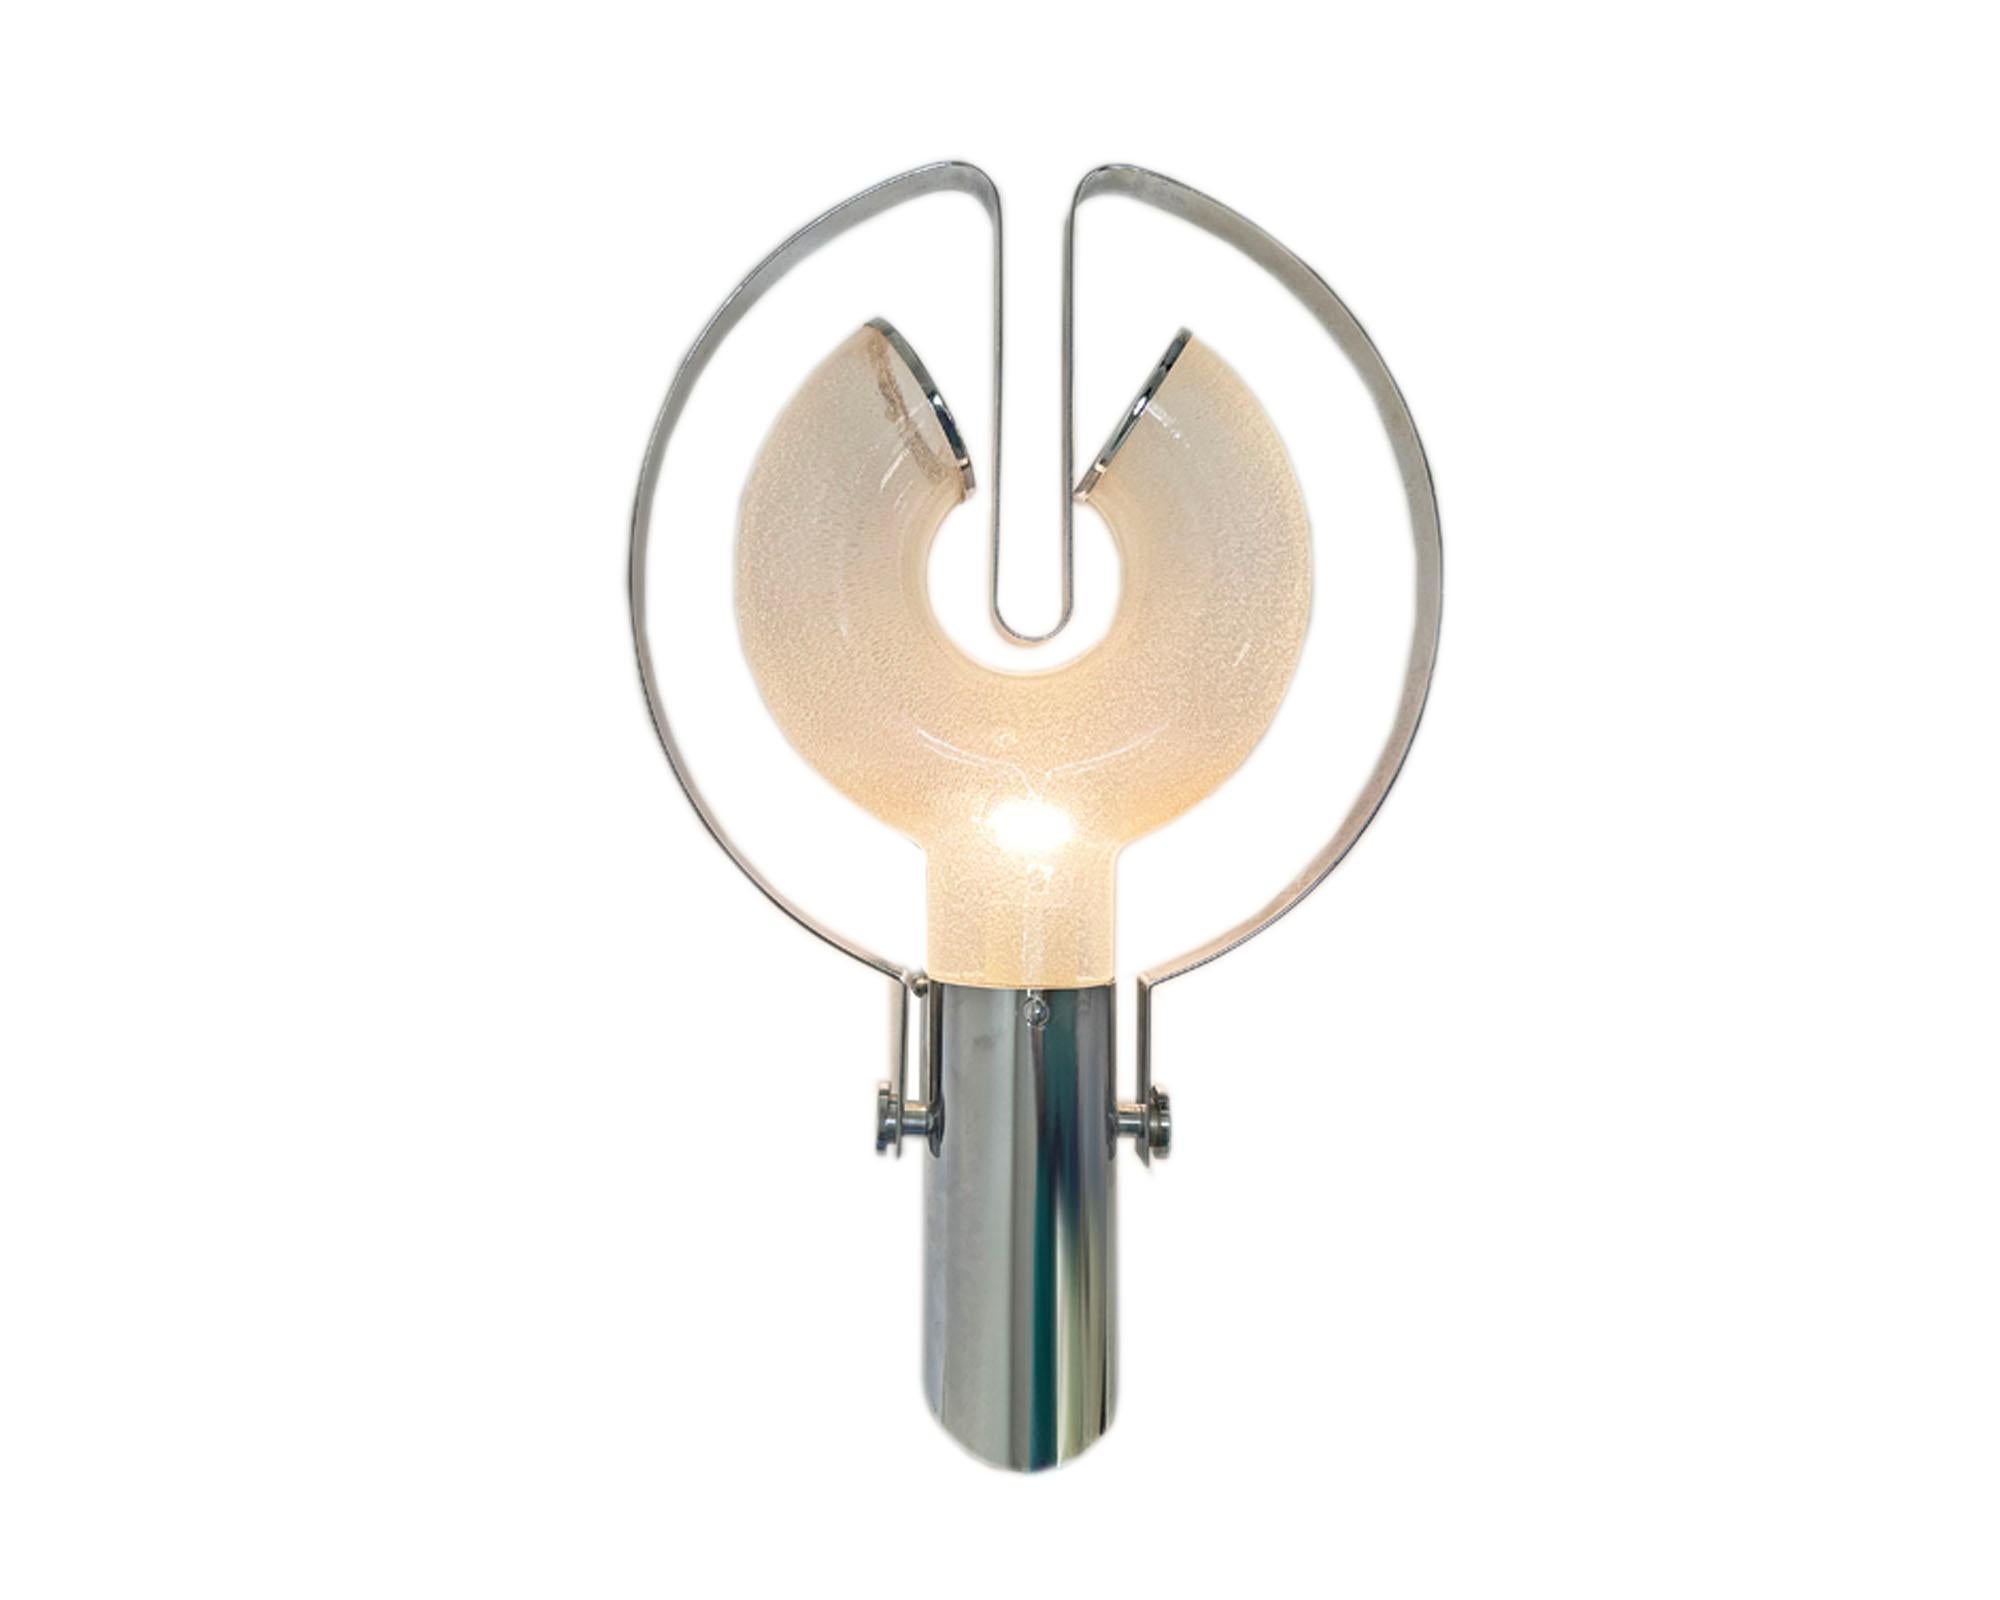 A Space Age wall sconce designed by the Italian designer Aldo Nason (born 1920) for Mazzega. Made in Murano, Italy, the sconce has a ﻿﻿pulegoso-like glass shade filled with small bubbles throughout. The shade is held within a chrome tube wall mount